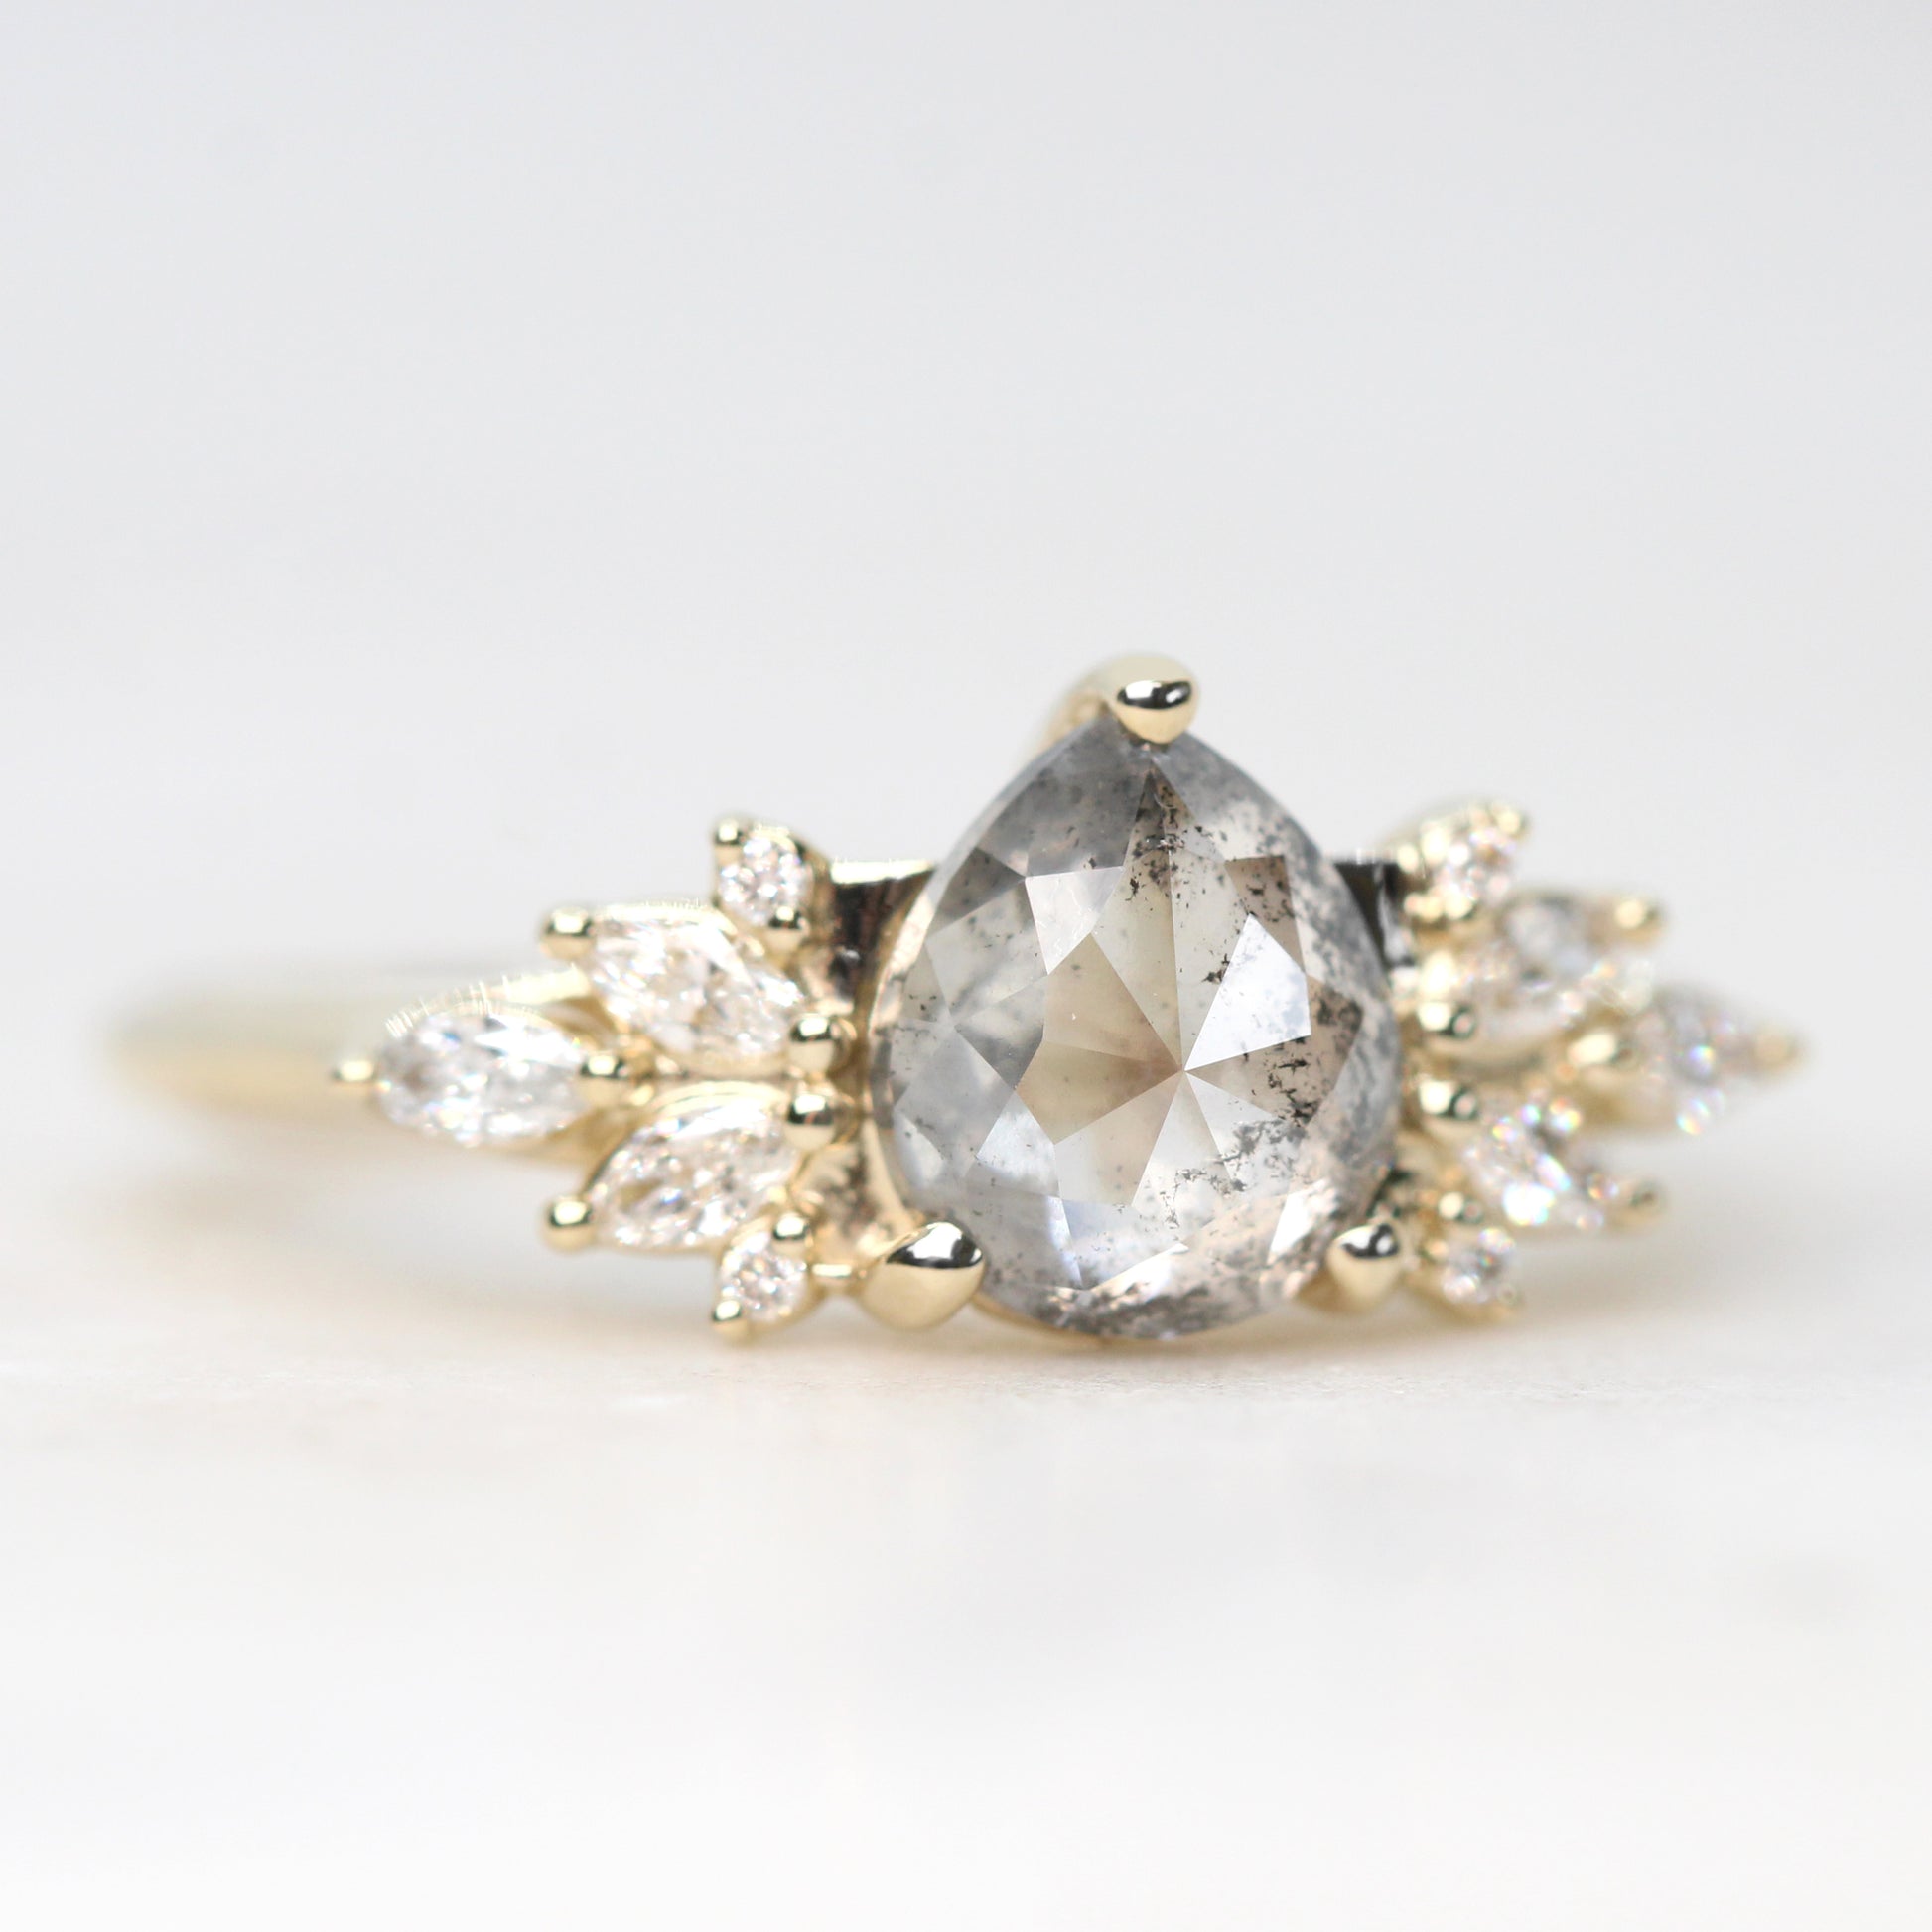 Odette Ring with a 1.50 Carat Pear Clear Gray Salt and Pepper Diamond and White Accent Diamonds in 14k Yellow Gold - Ready to Size and Ship - Midwinter Co. Alternative Bridal Rings and Modern Fine Jewelry